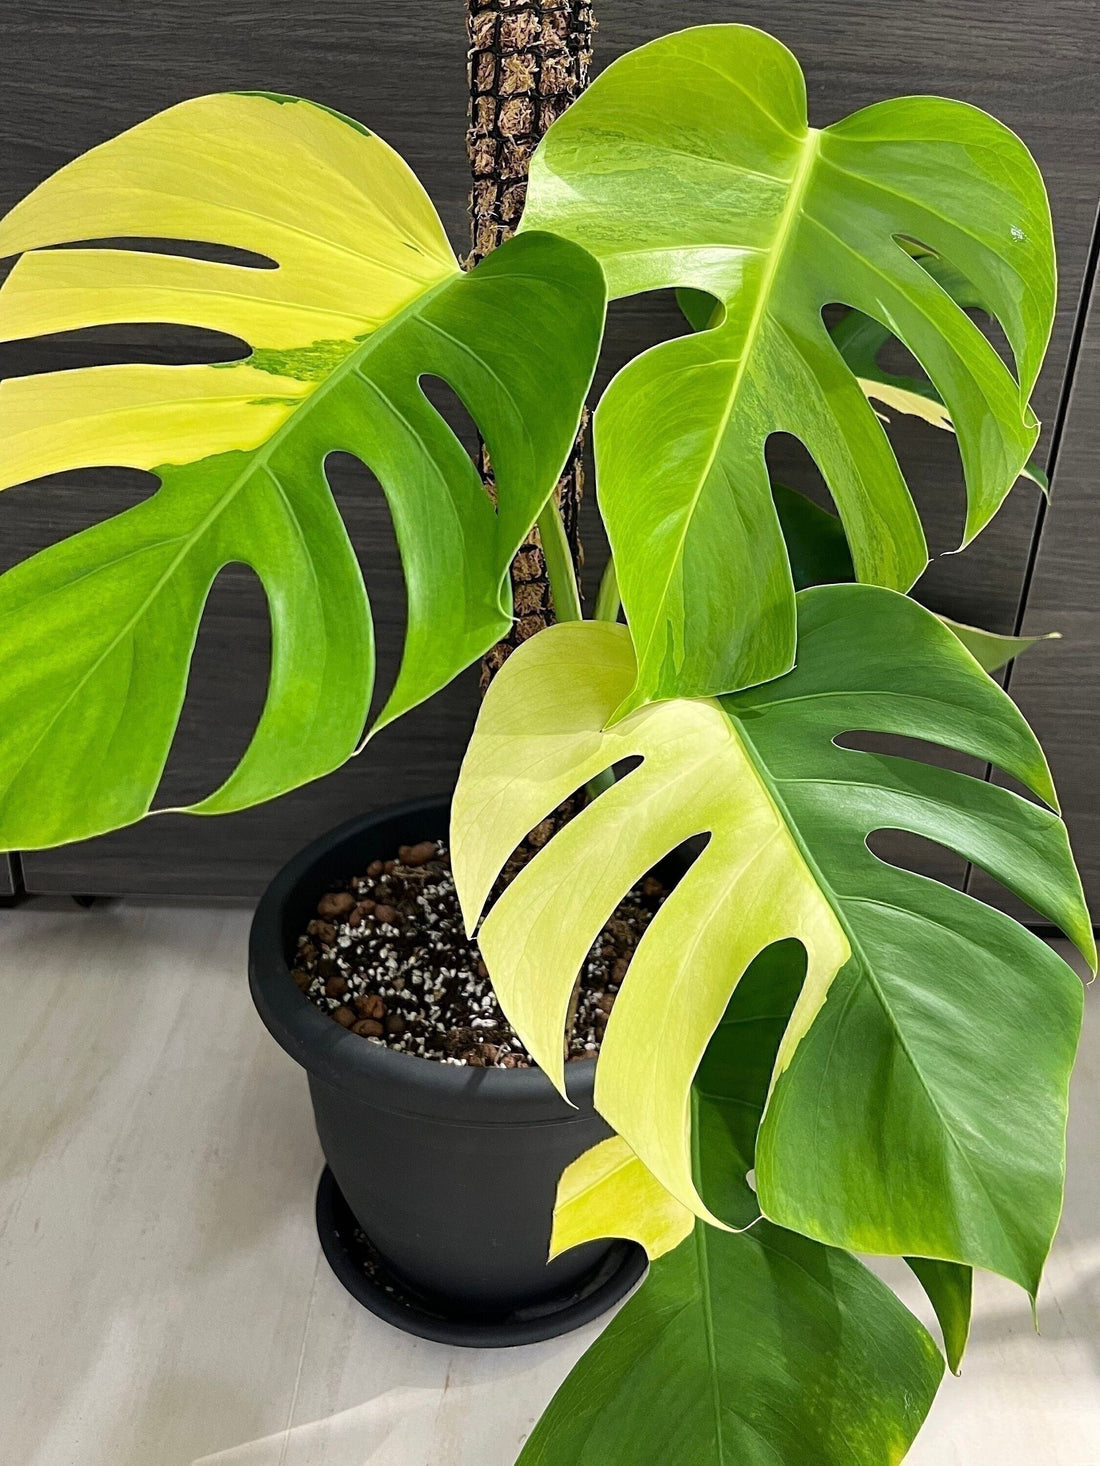 How can I make my Monstera aurea variagated more variegated?